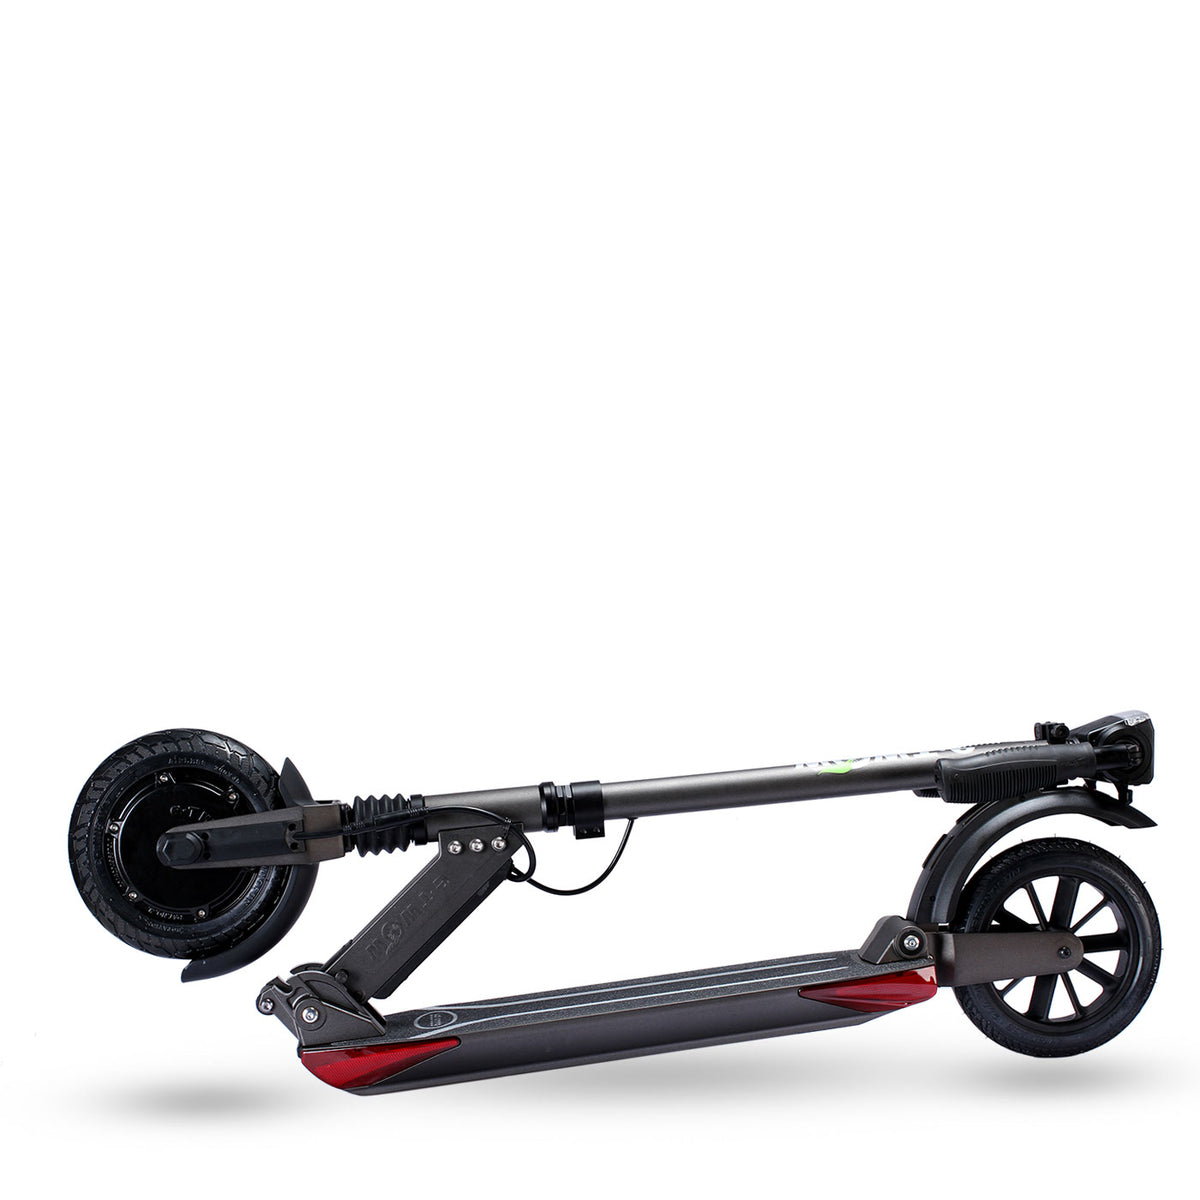 E-twow folding electric scooter stores and travels easily.